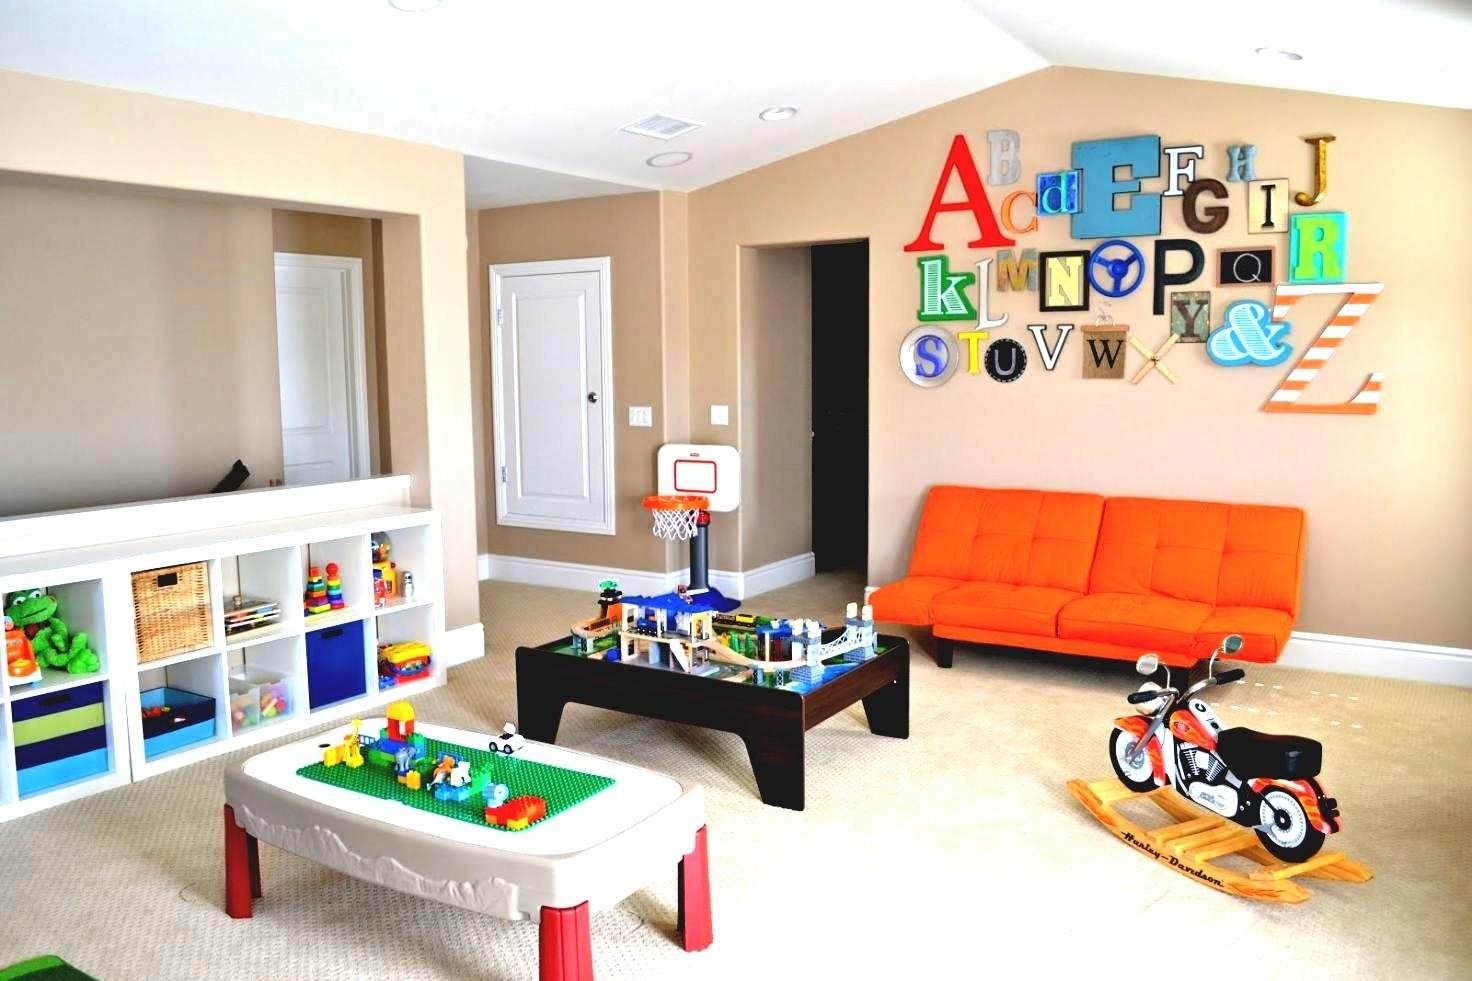 10 Gorgeous Game Room Ideas For Kids kids game room furniture ideas best decor for small spaces base 2022